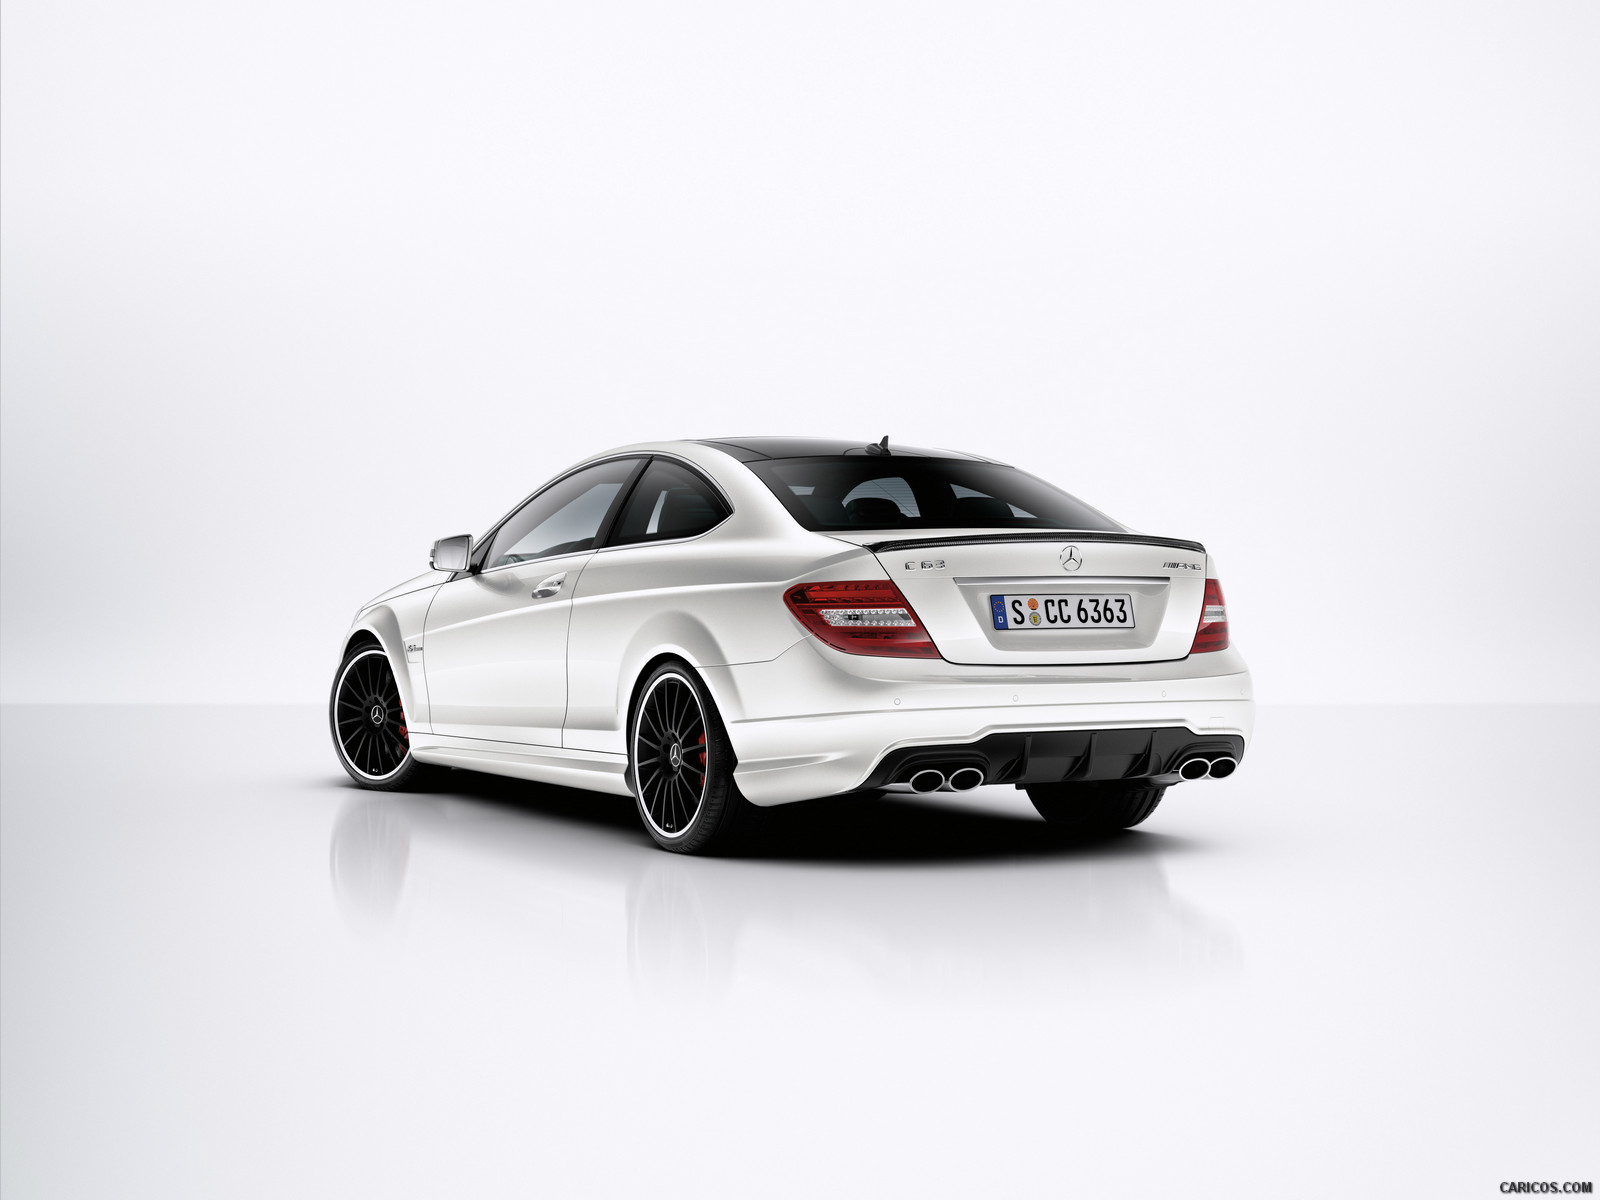 Mercedes-Benz C63 AMG Coupe (2012)  - Rear, #63 of 64